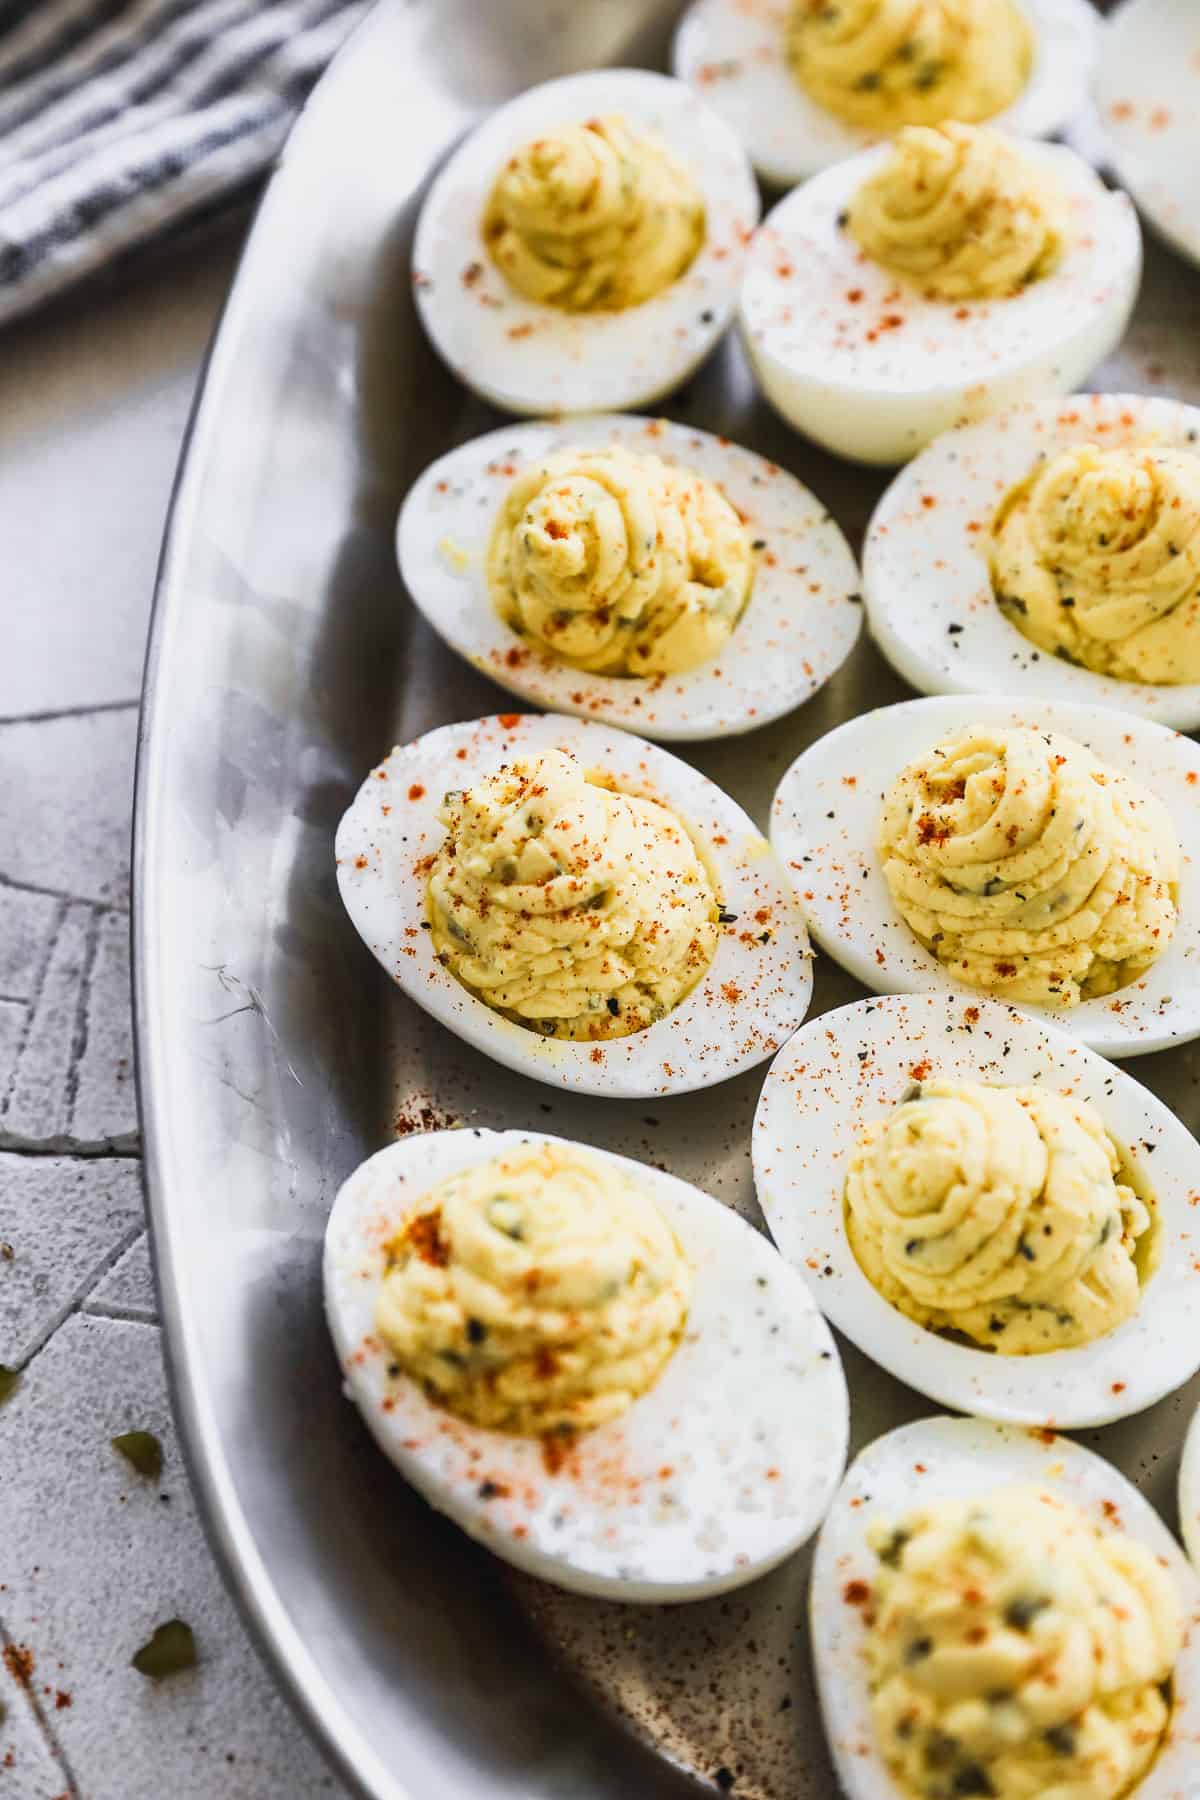 7 Amazing Egg Recipes, Gallery posted by Flaevor Recipes